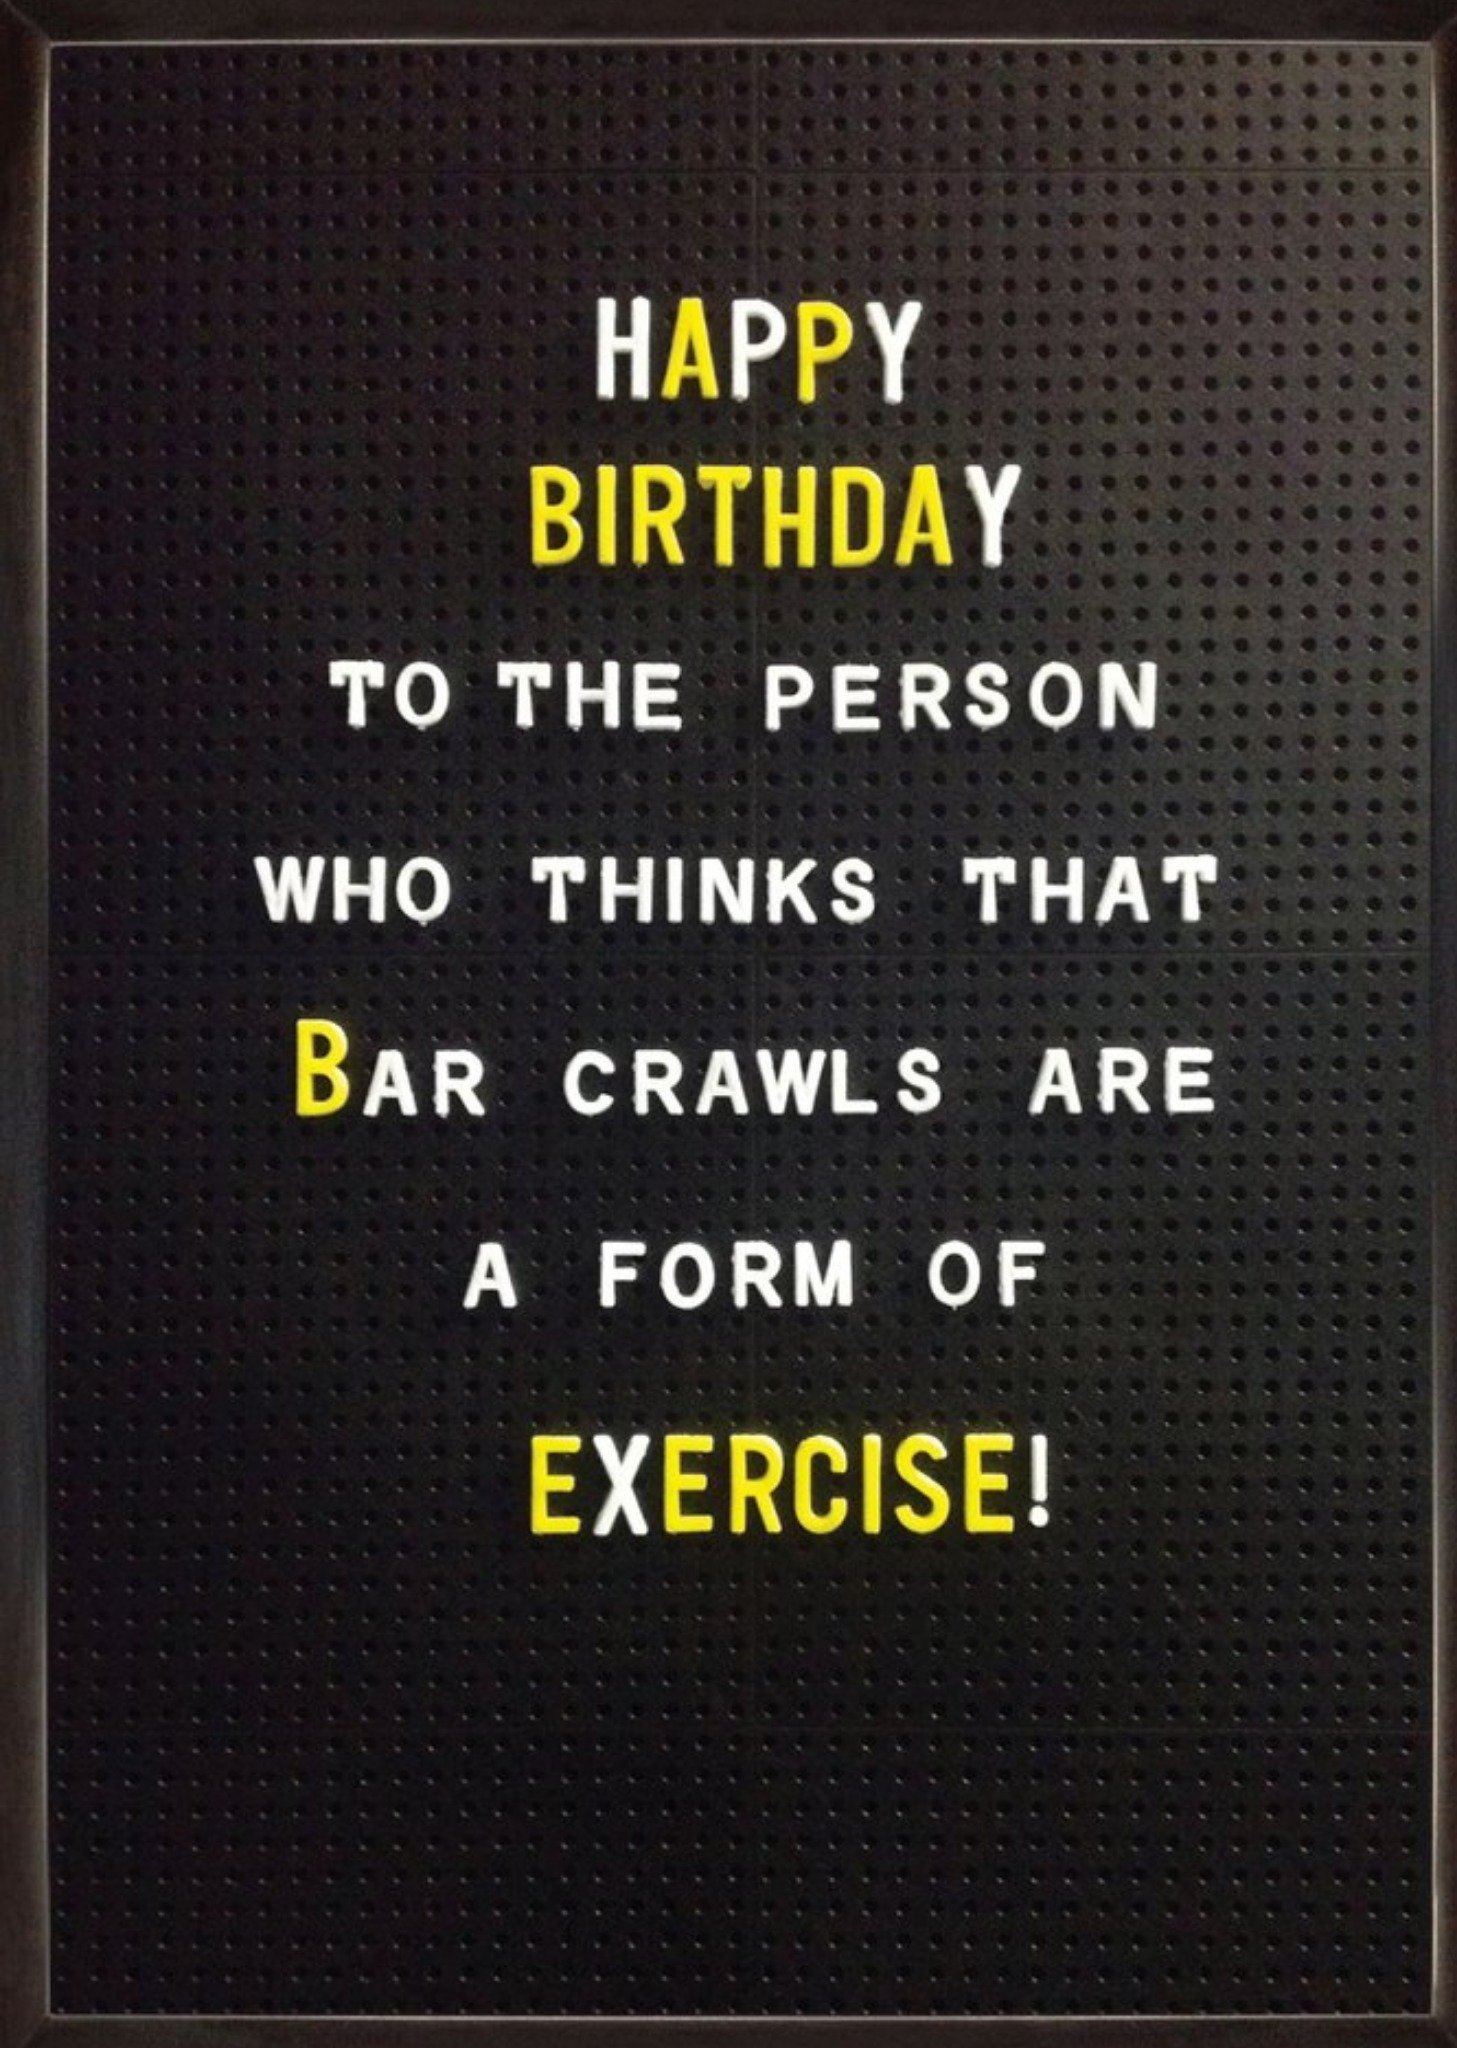 Brainbox Candy Funny Bar Crawls Form Of Exercise Birthday Card, Large